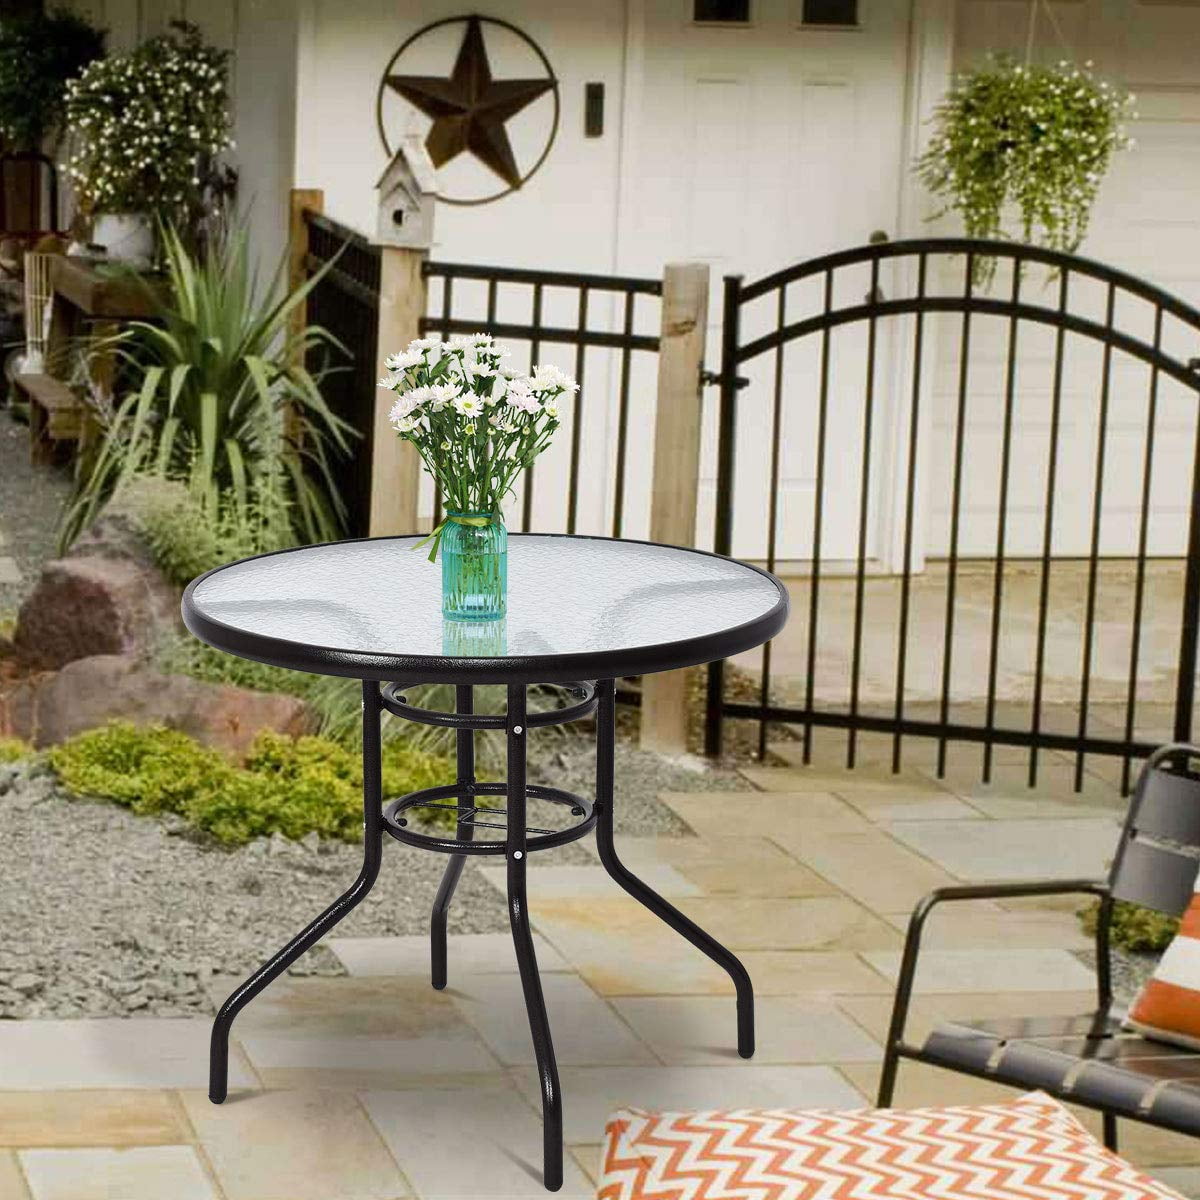 Round Glass Patio Dining Table 31, Round Bistro Table With Umbrella Hole